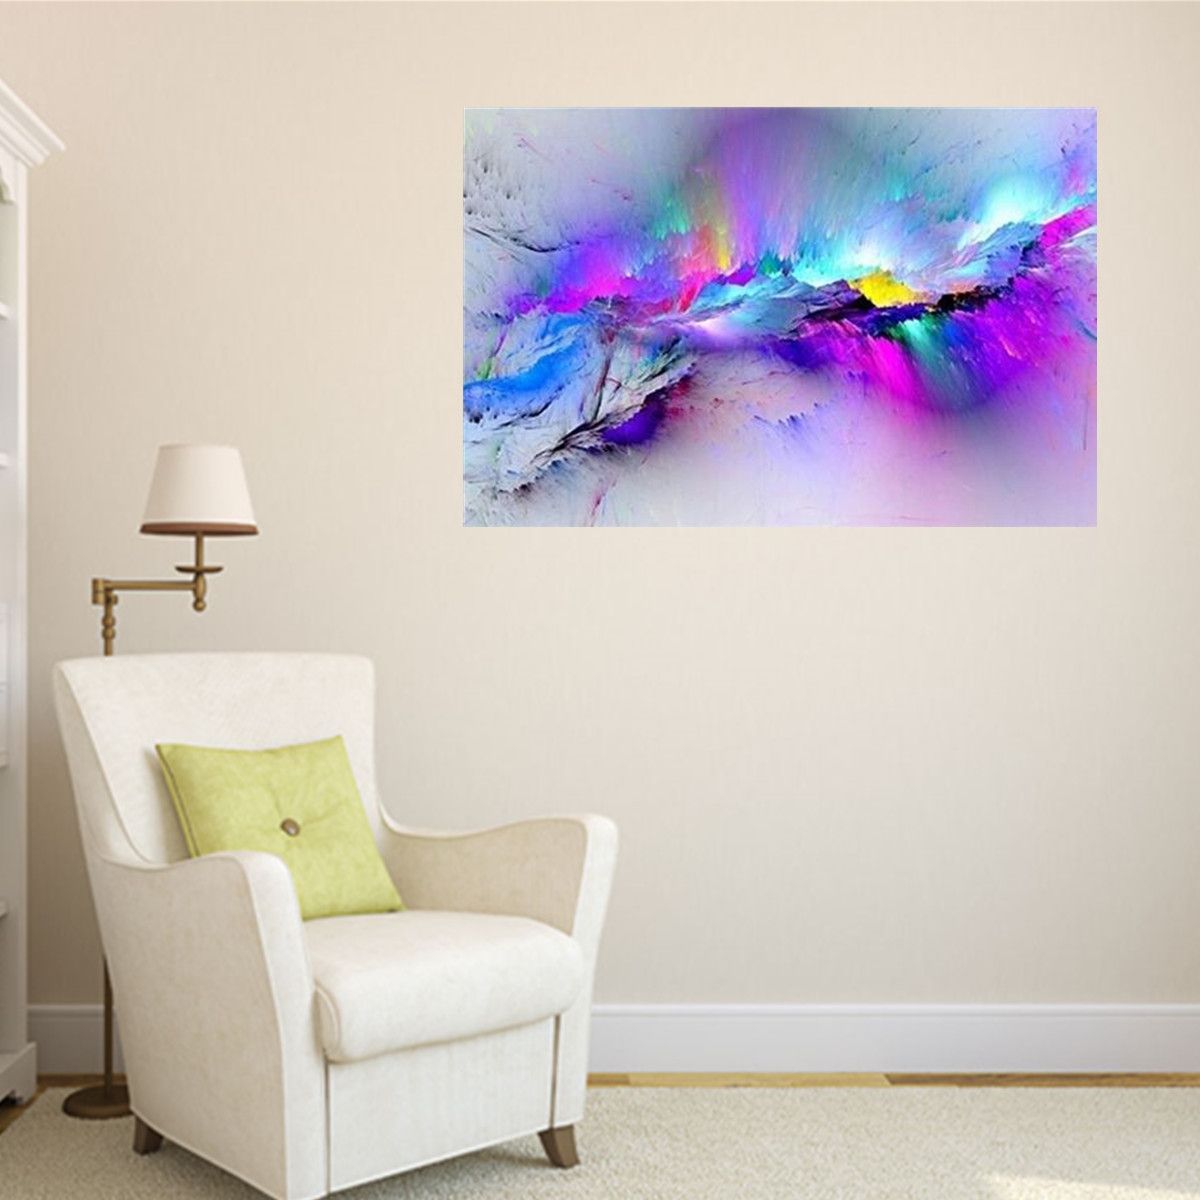 Abstract-Clouds-Colorful-Canvas-Painting-Modern-Wall-Pictures-For-Living-Room-Home-Decor-Paper-1446224